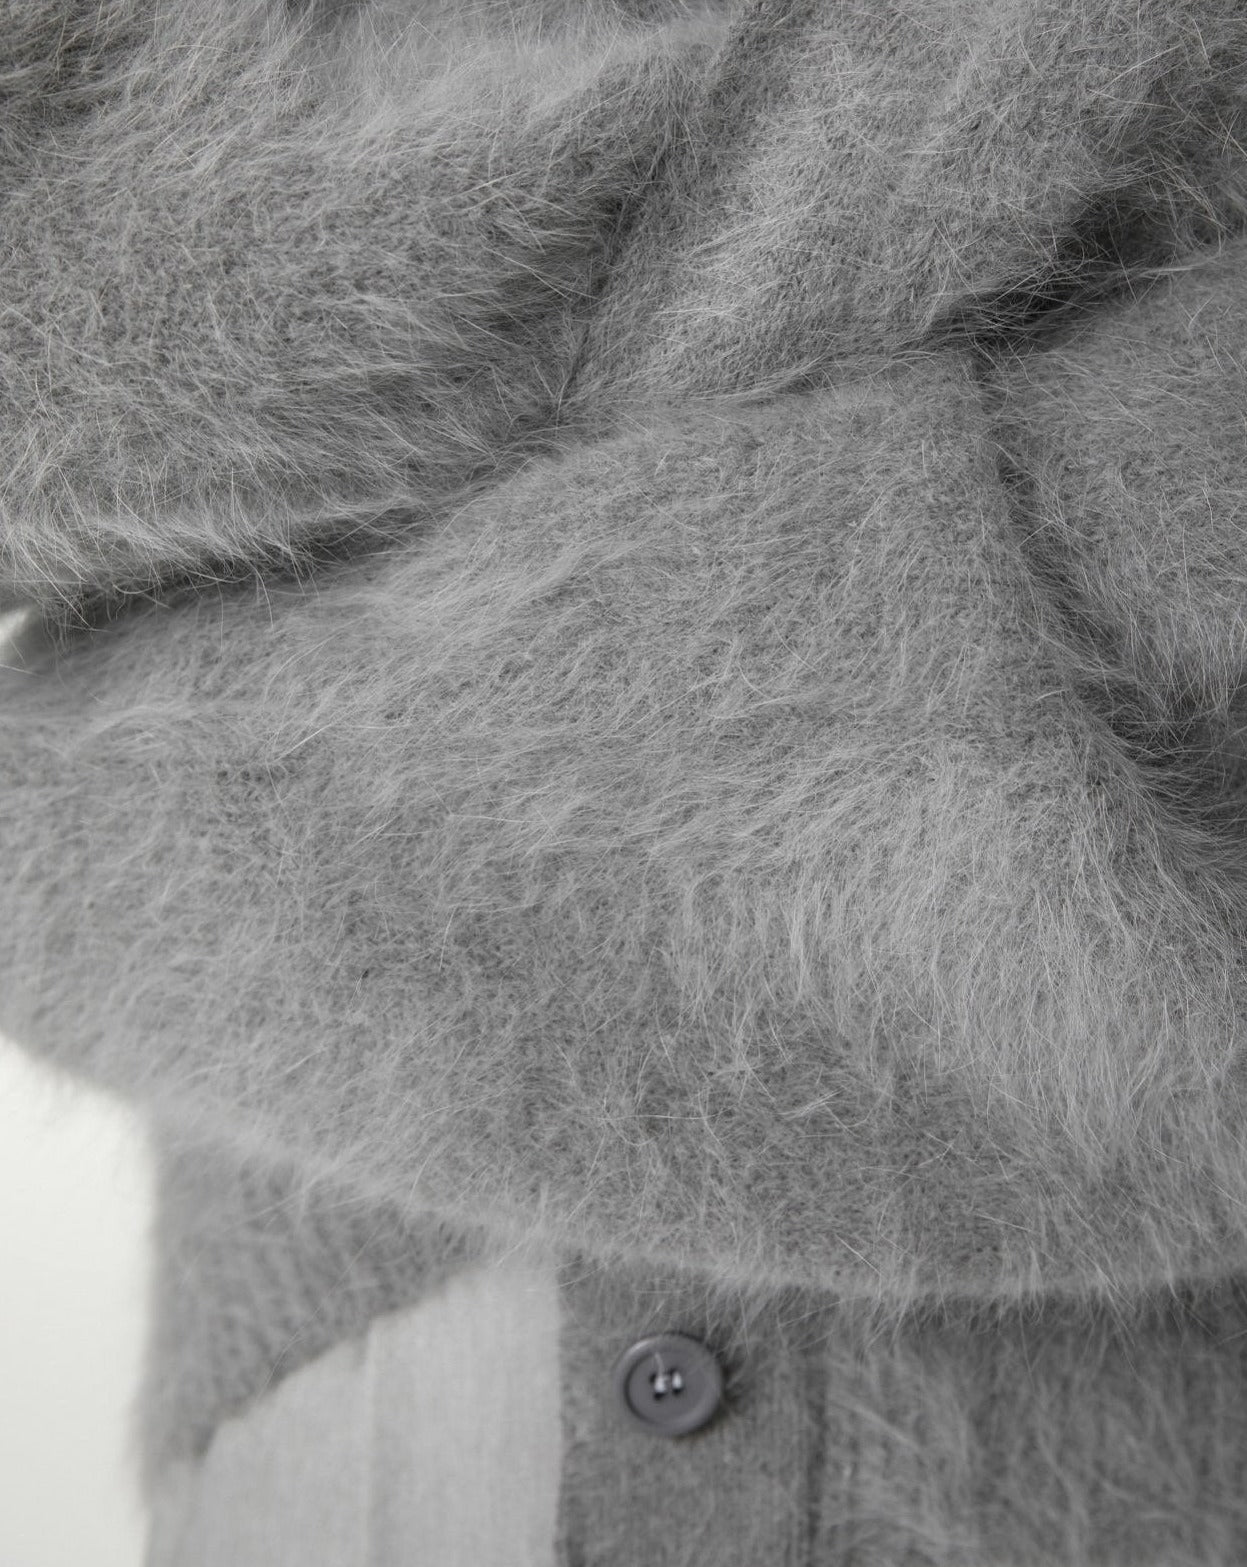 [Ready to ship] [PAPERMOON] AW/LUX Mink Angora Oversized Knit Cardigan